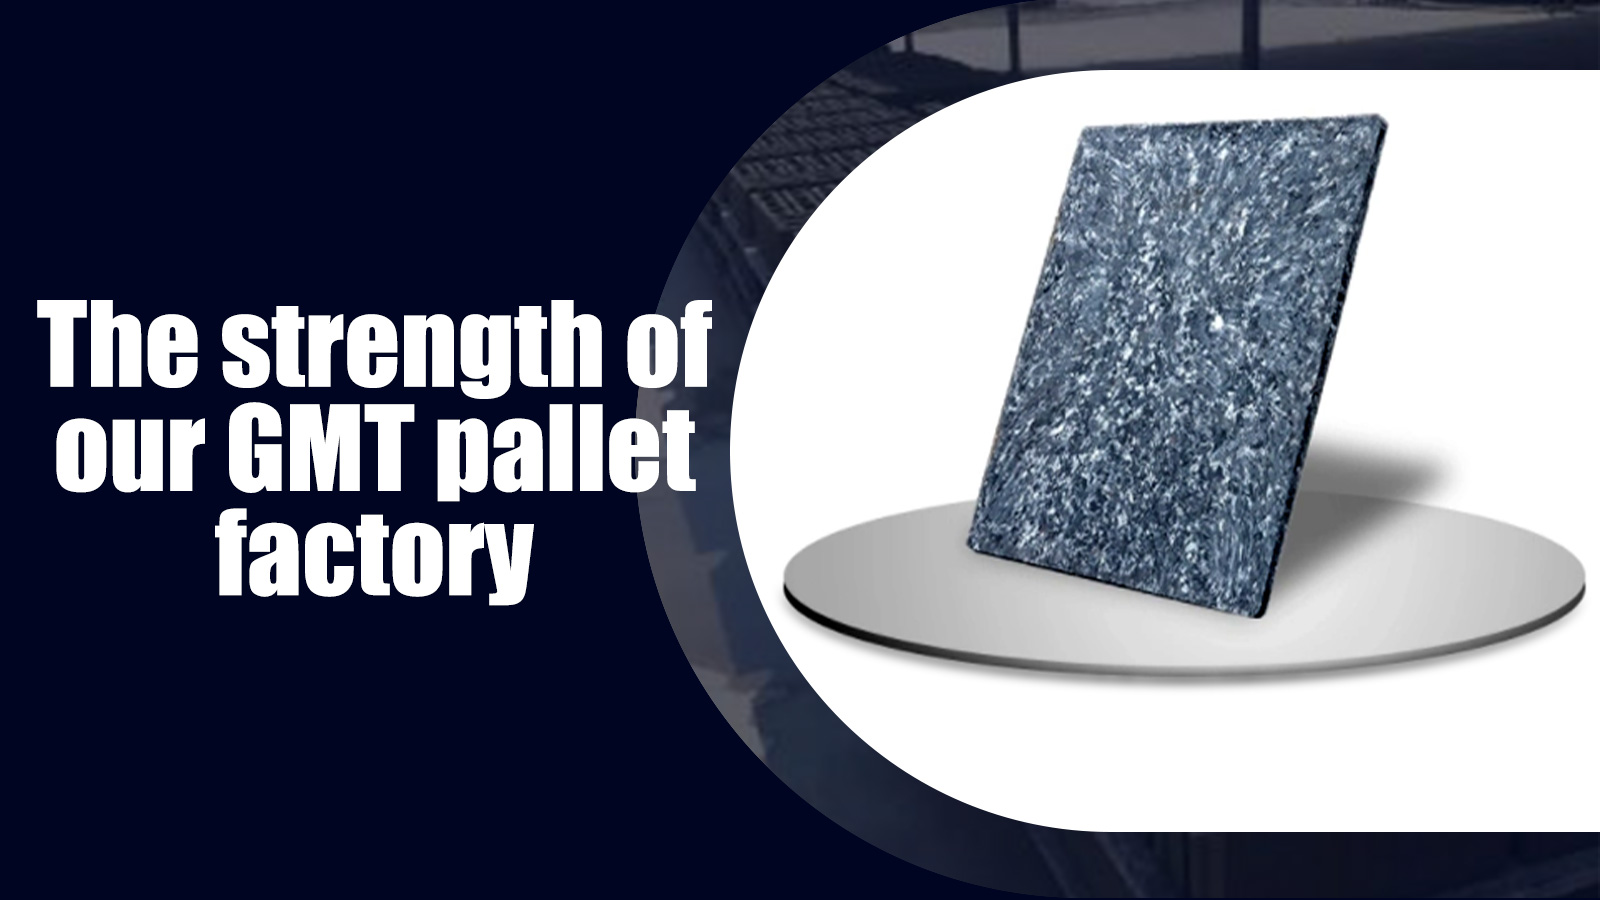 The strength of our GMT pallet factory